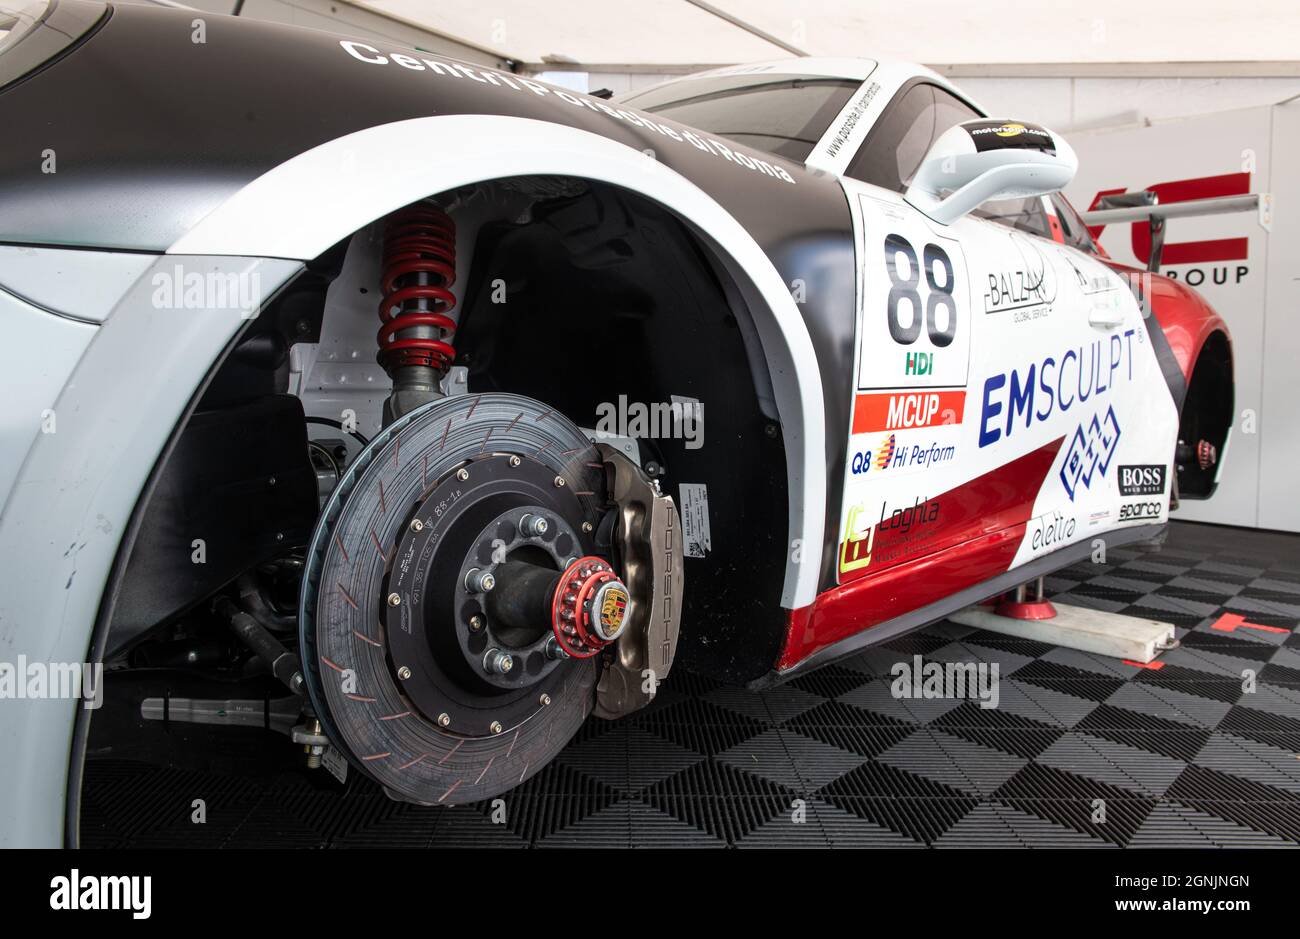 Vallelunga, italy september 19th 2021 Aci racing weekend. Unmounted tire on race car Porsche visible brake mechanical part calliper and disc Stock Photo